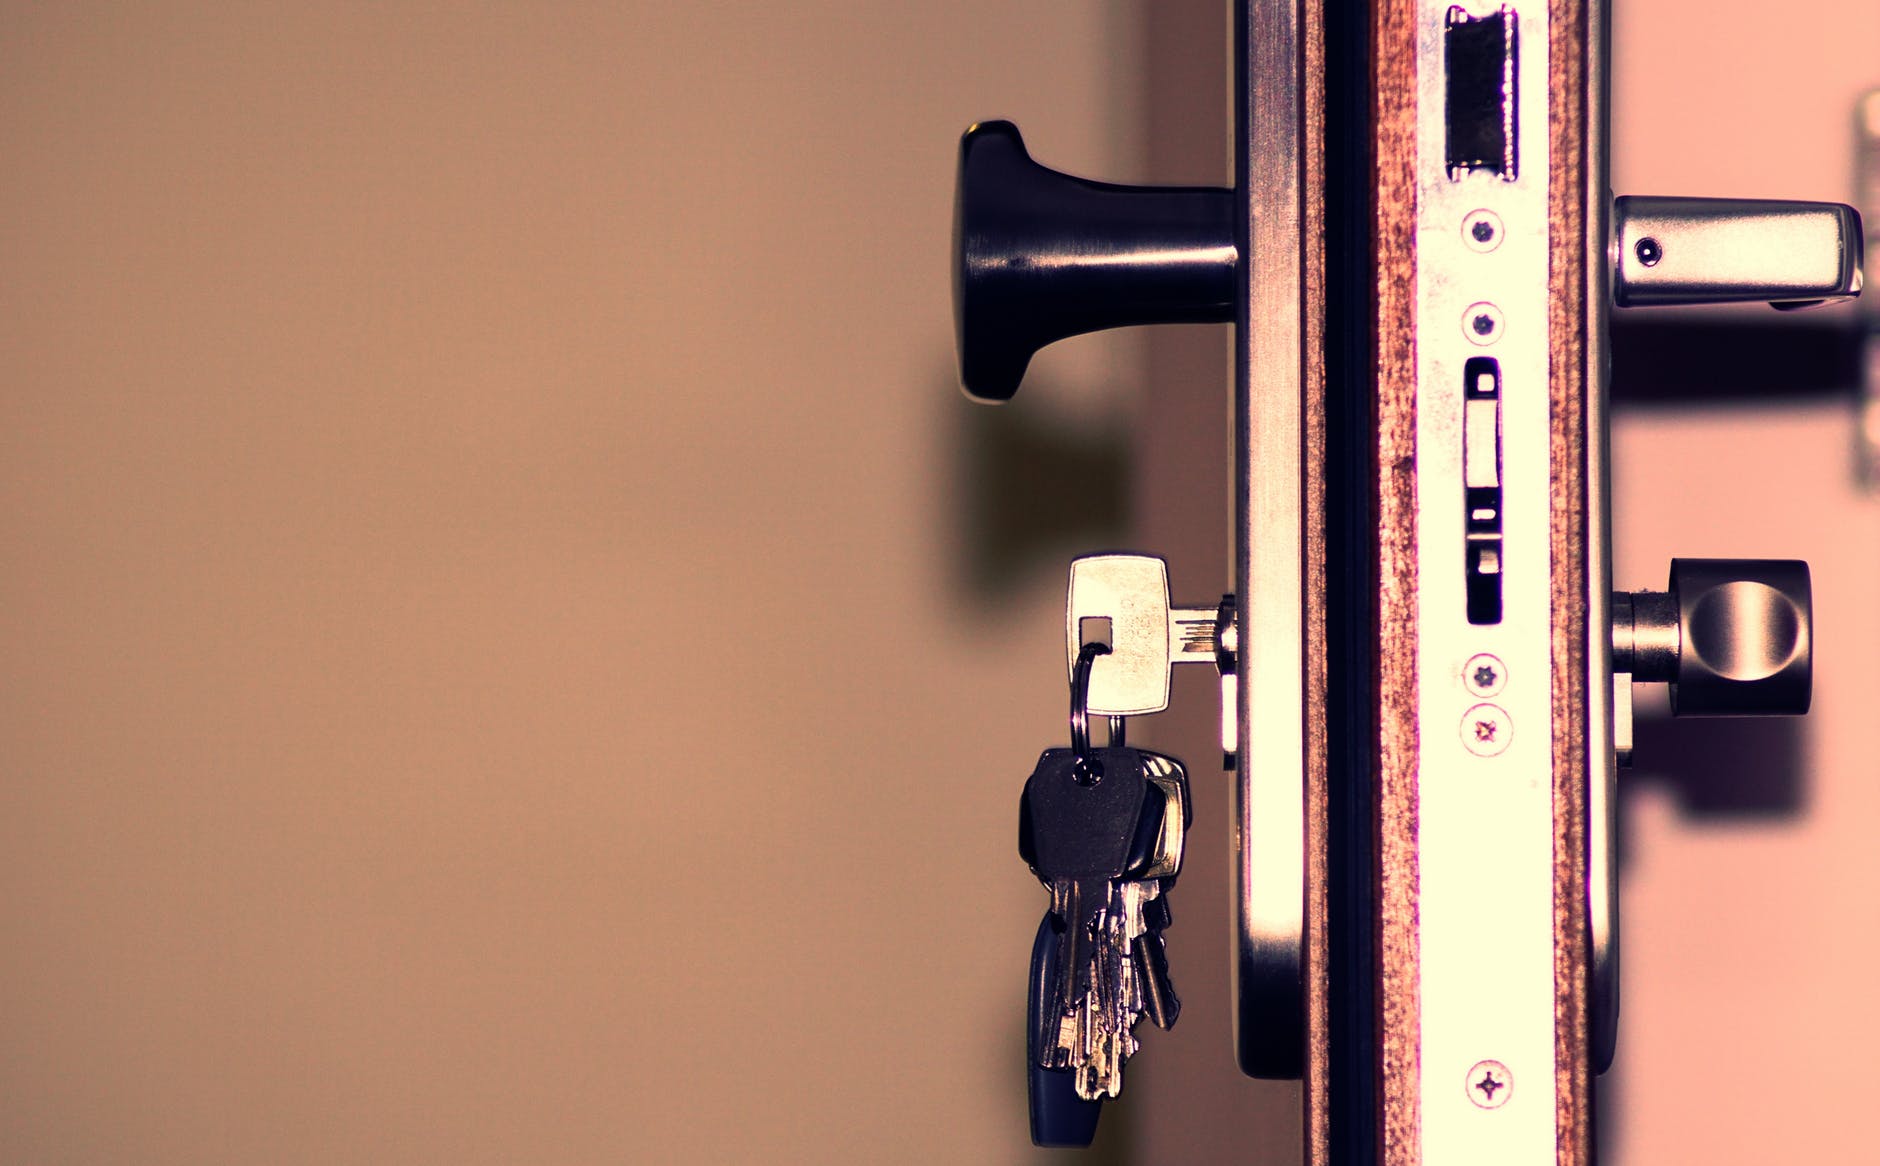 Should you rekey the locks on your rental property after your tenant moves out? Yes!